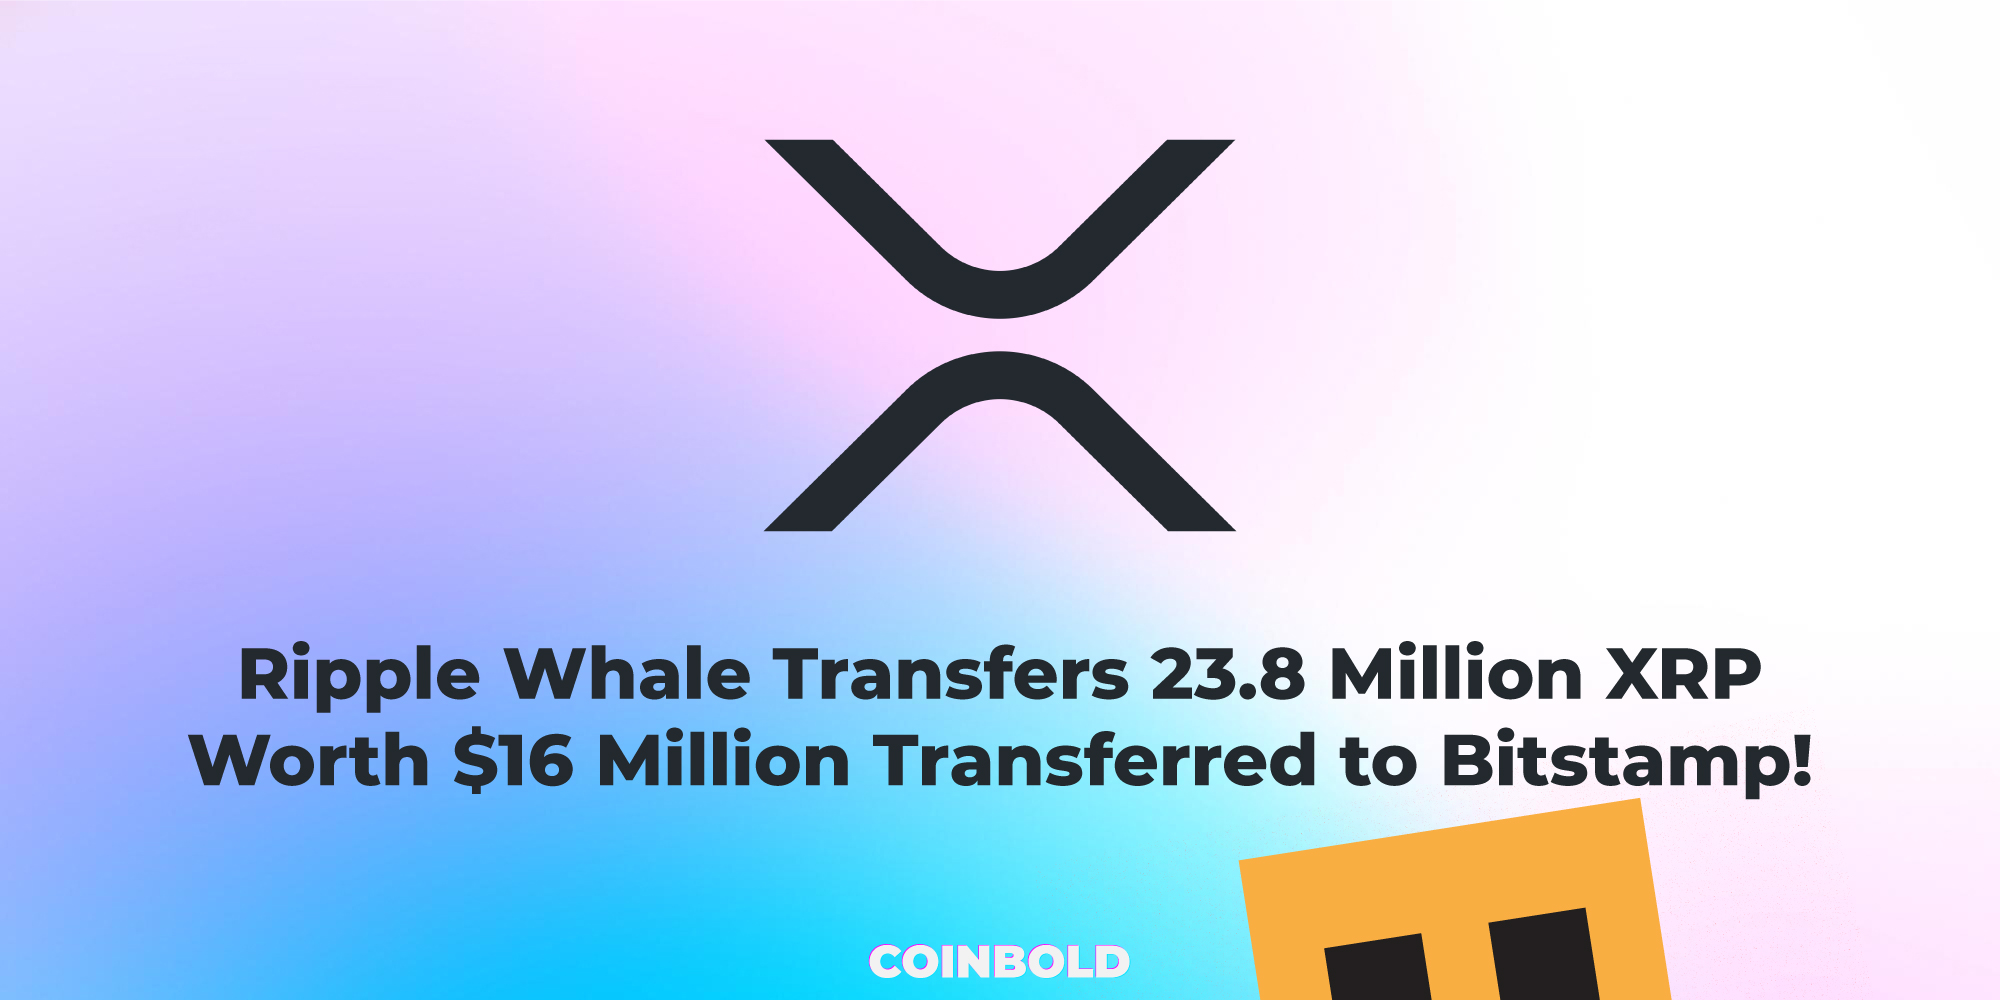 Ripple Whale Transfers 23.8 Million XRP Worth $16 Million Transferred to Bitstamp!